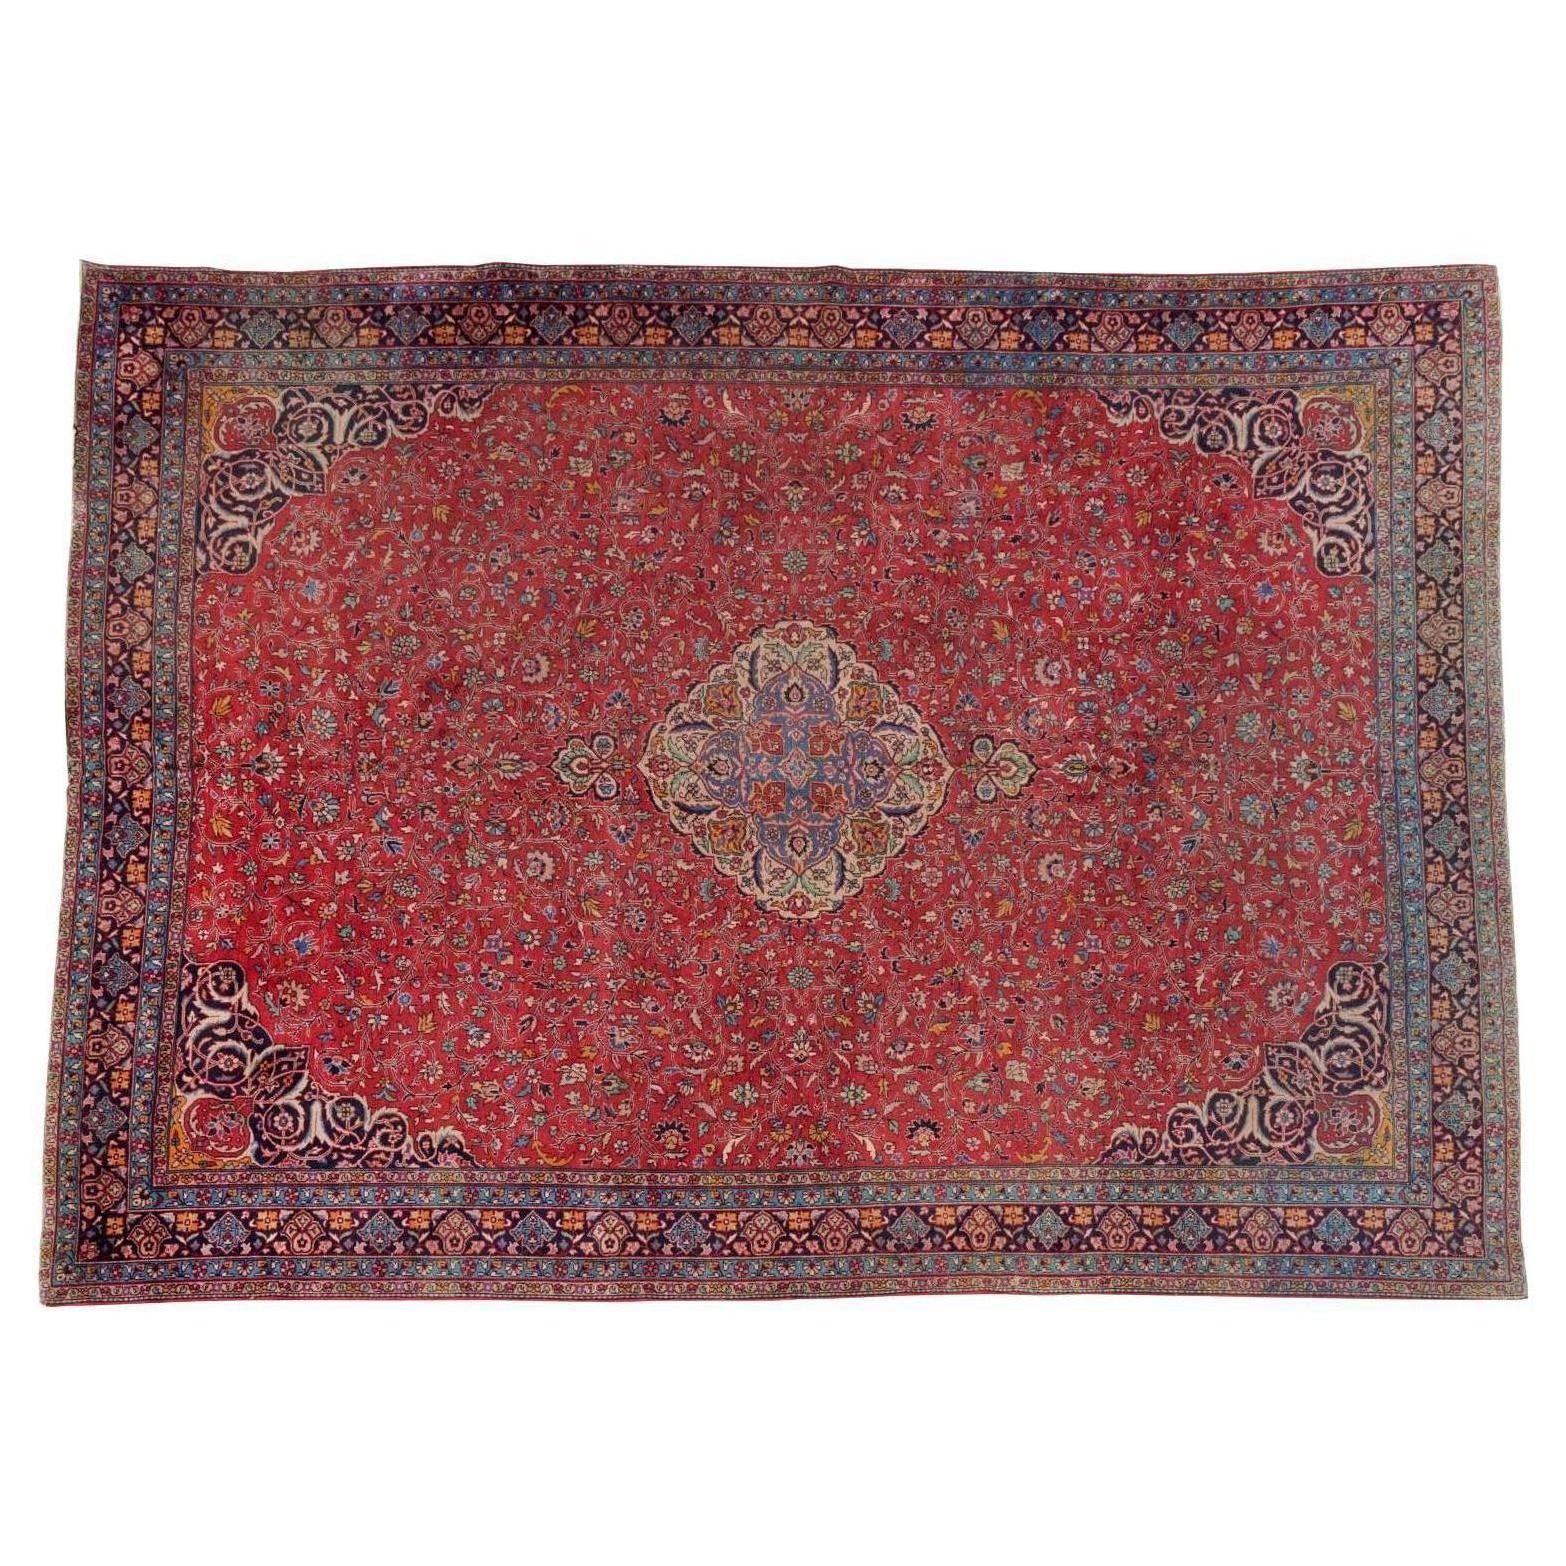 Early 20th C. Room Sized Kashan Carpet, Scrolling Floral Vines on a Red Ground For Sale